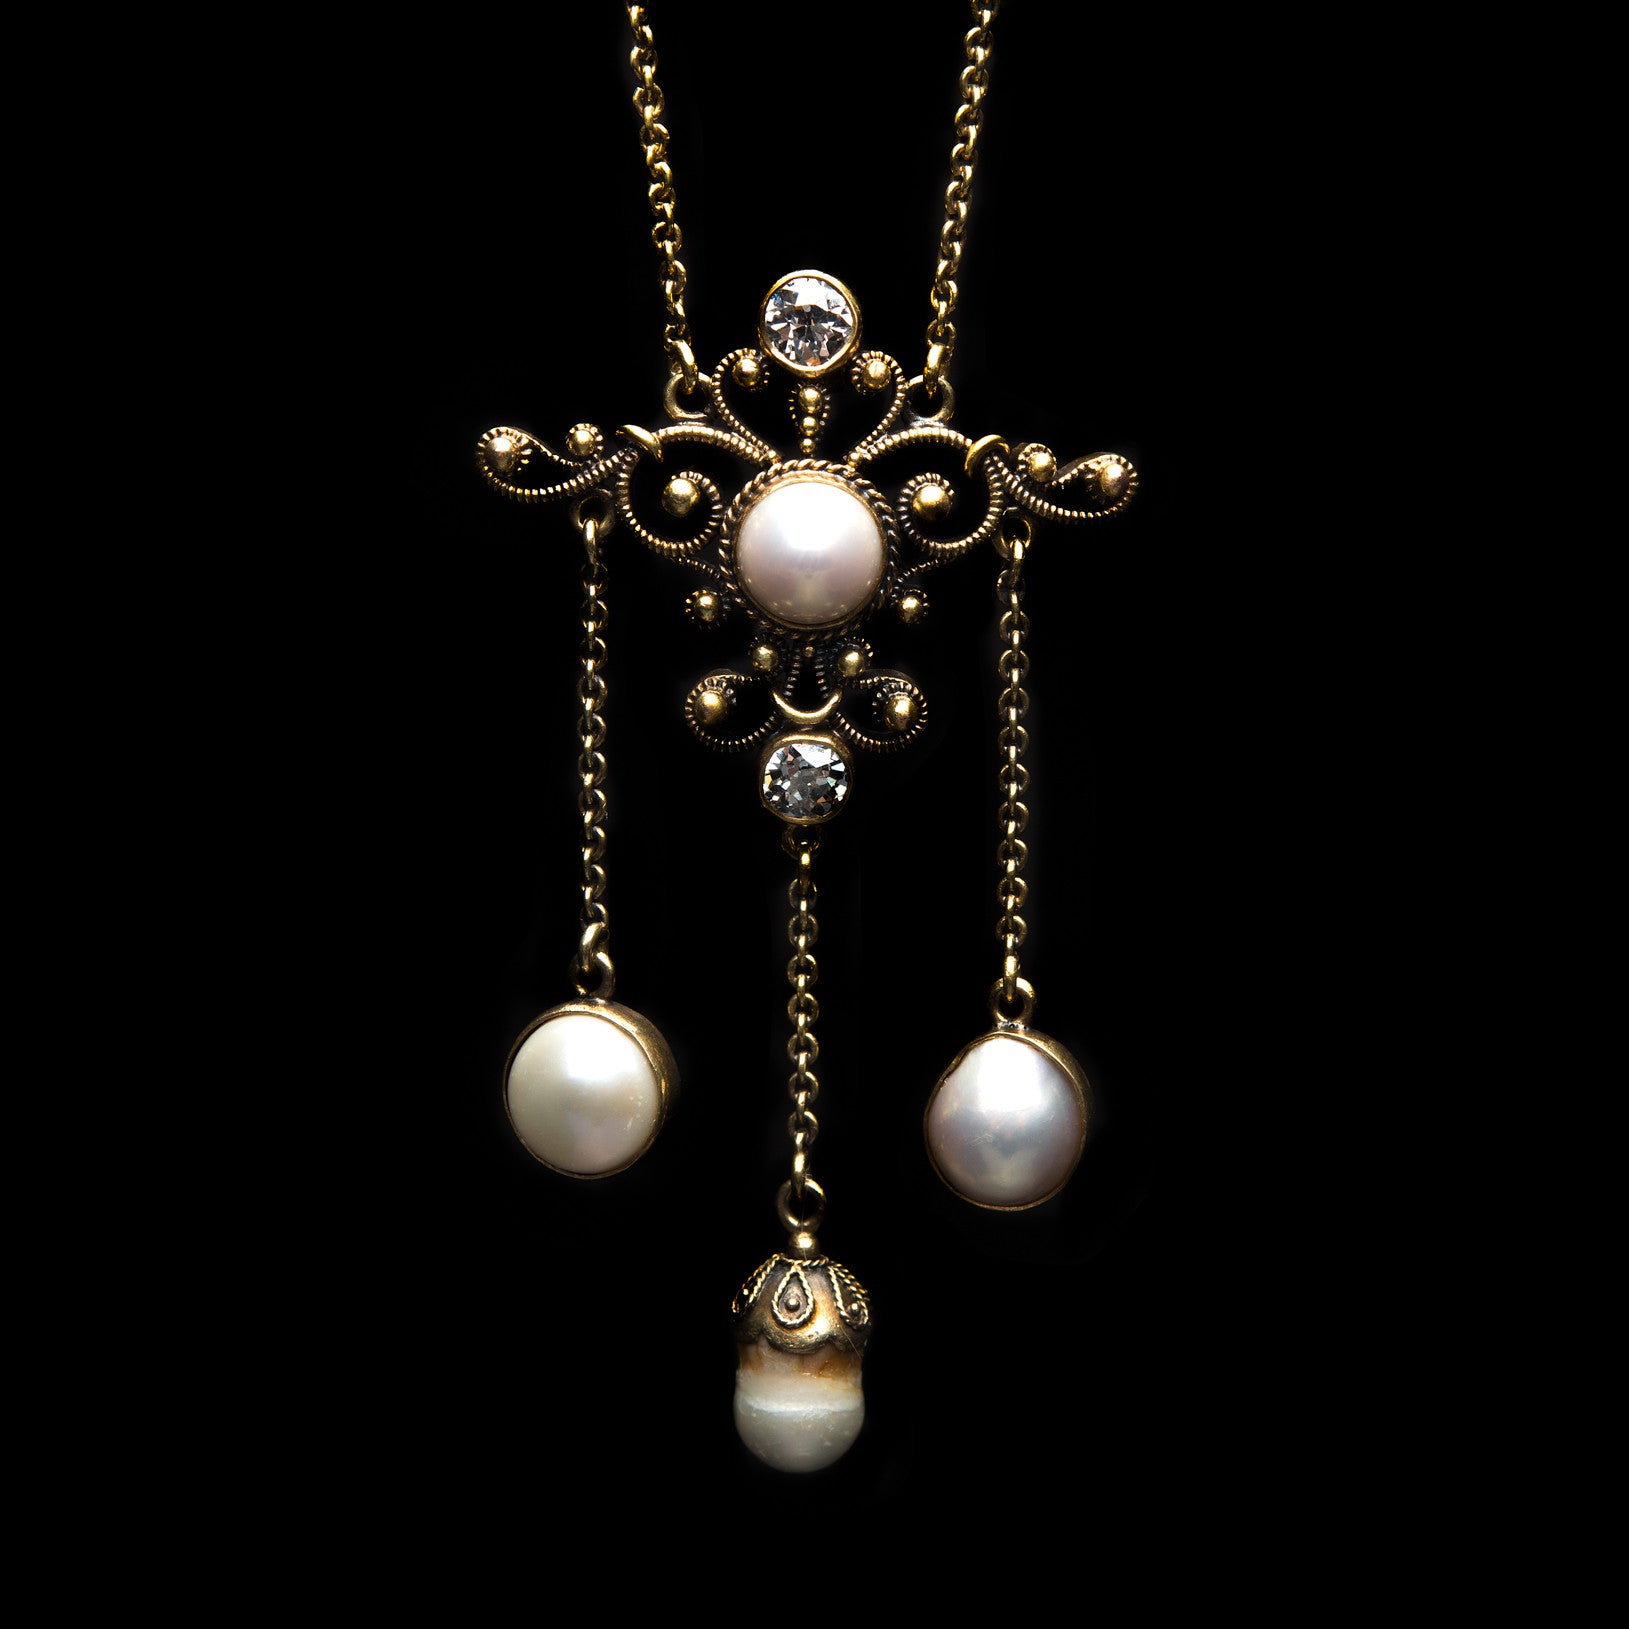 Timeless Pearl Cluster Necklace - Vintage Estate Jewelry